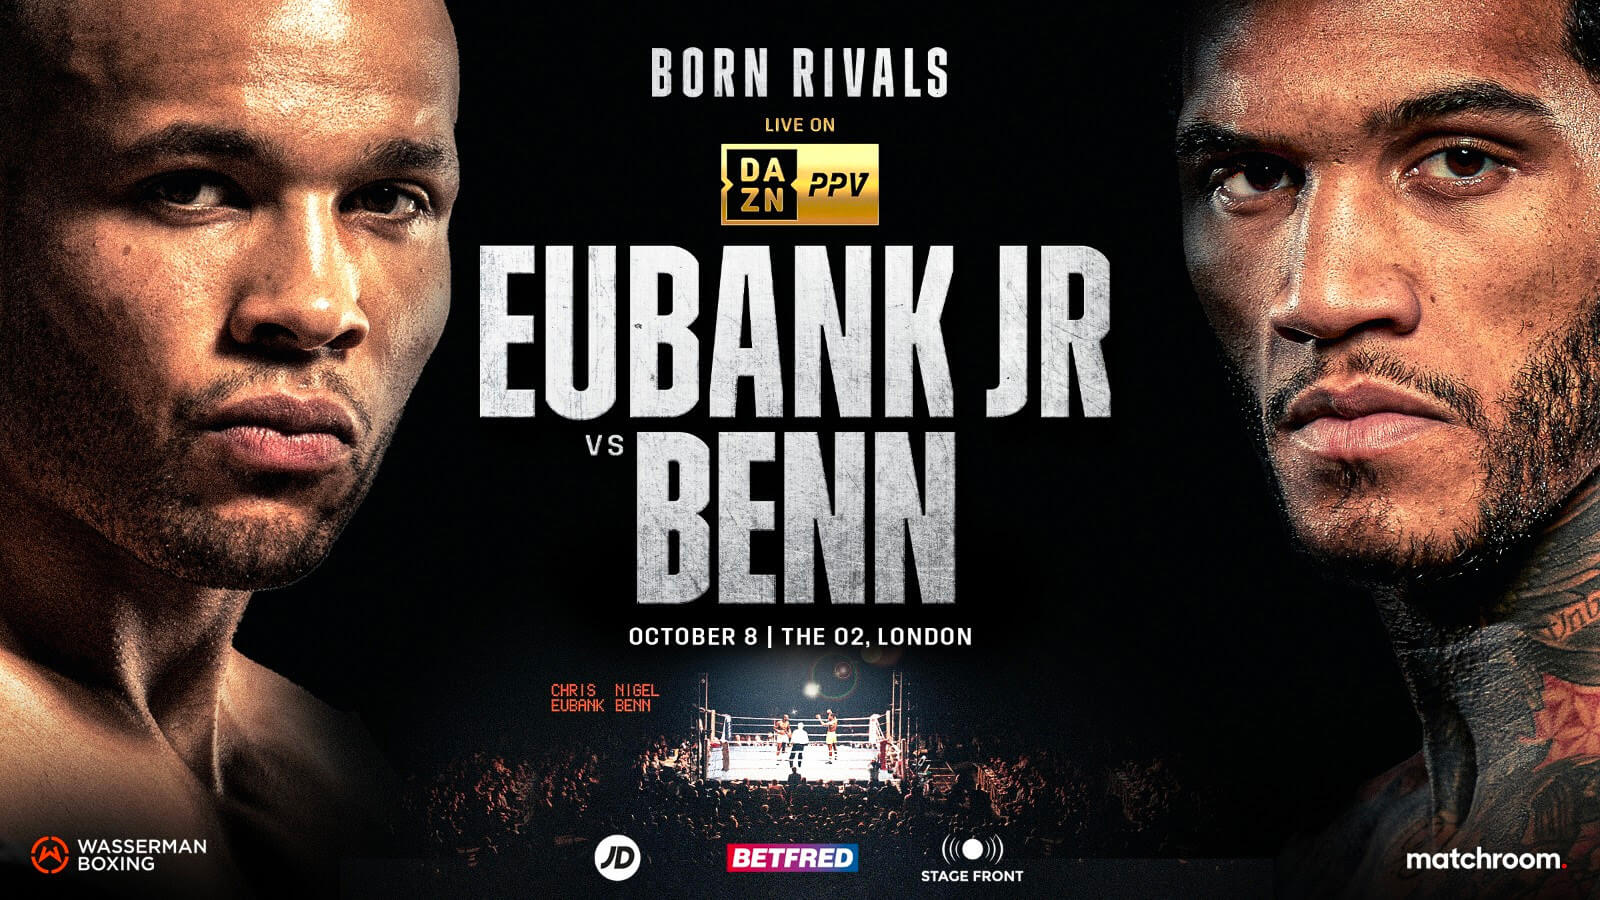 BORN RIVALS: EUBANK JR AND BENN CLASH IN MEGA FIGHT AT THE O2 IN LONDON